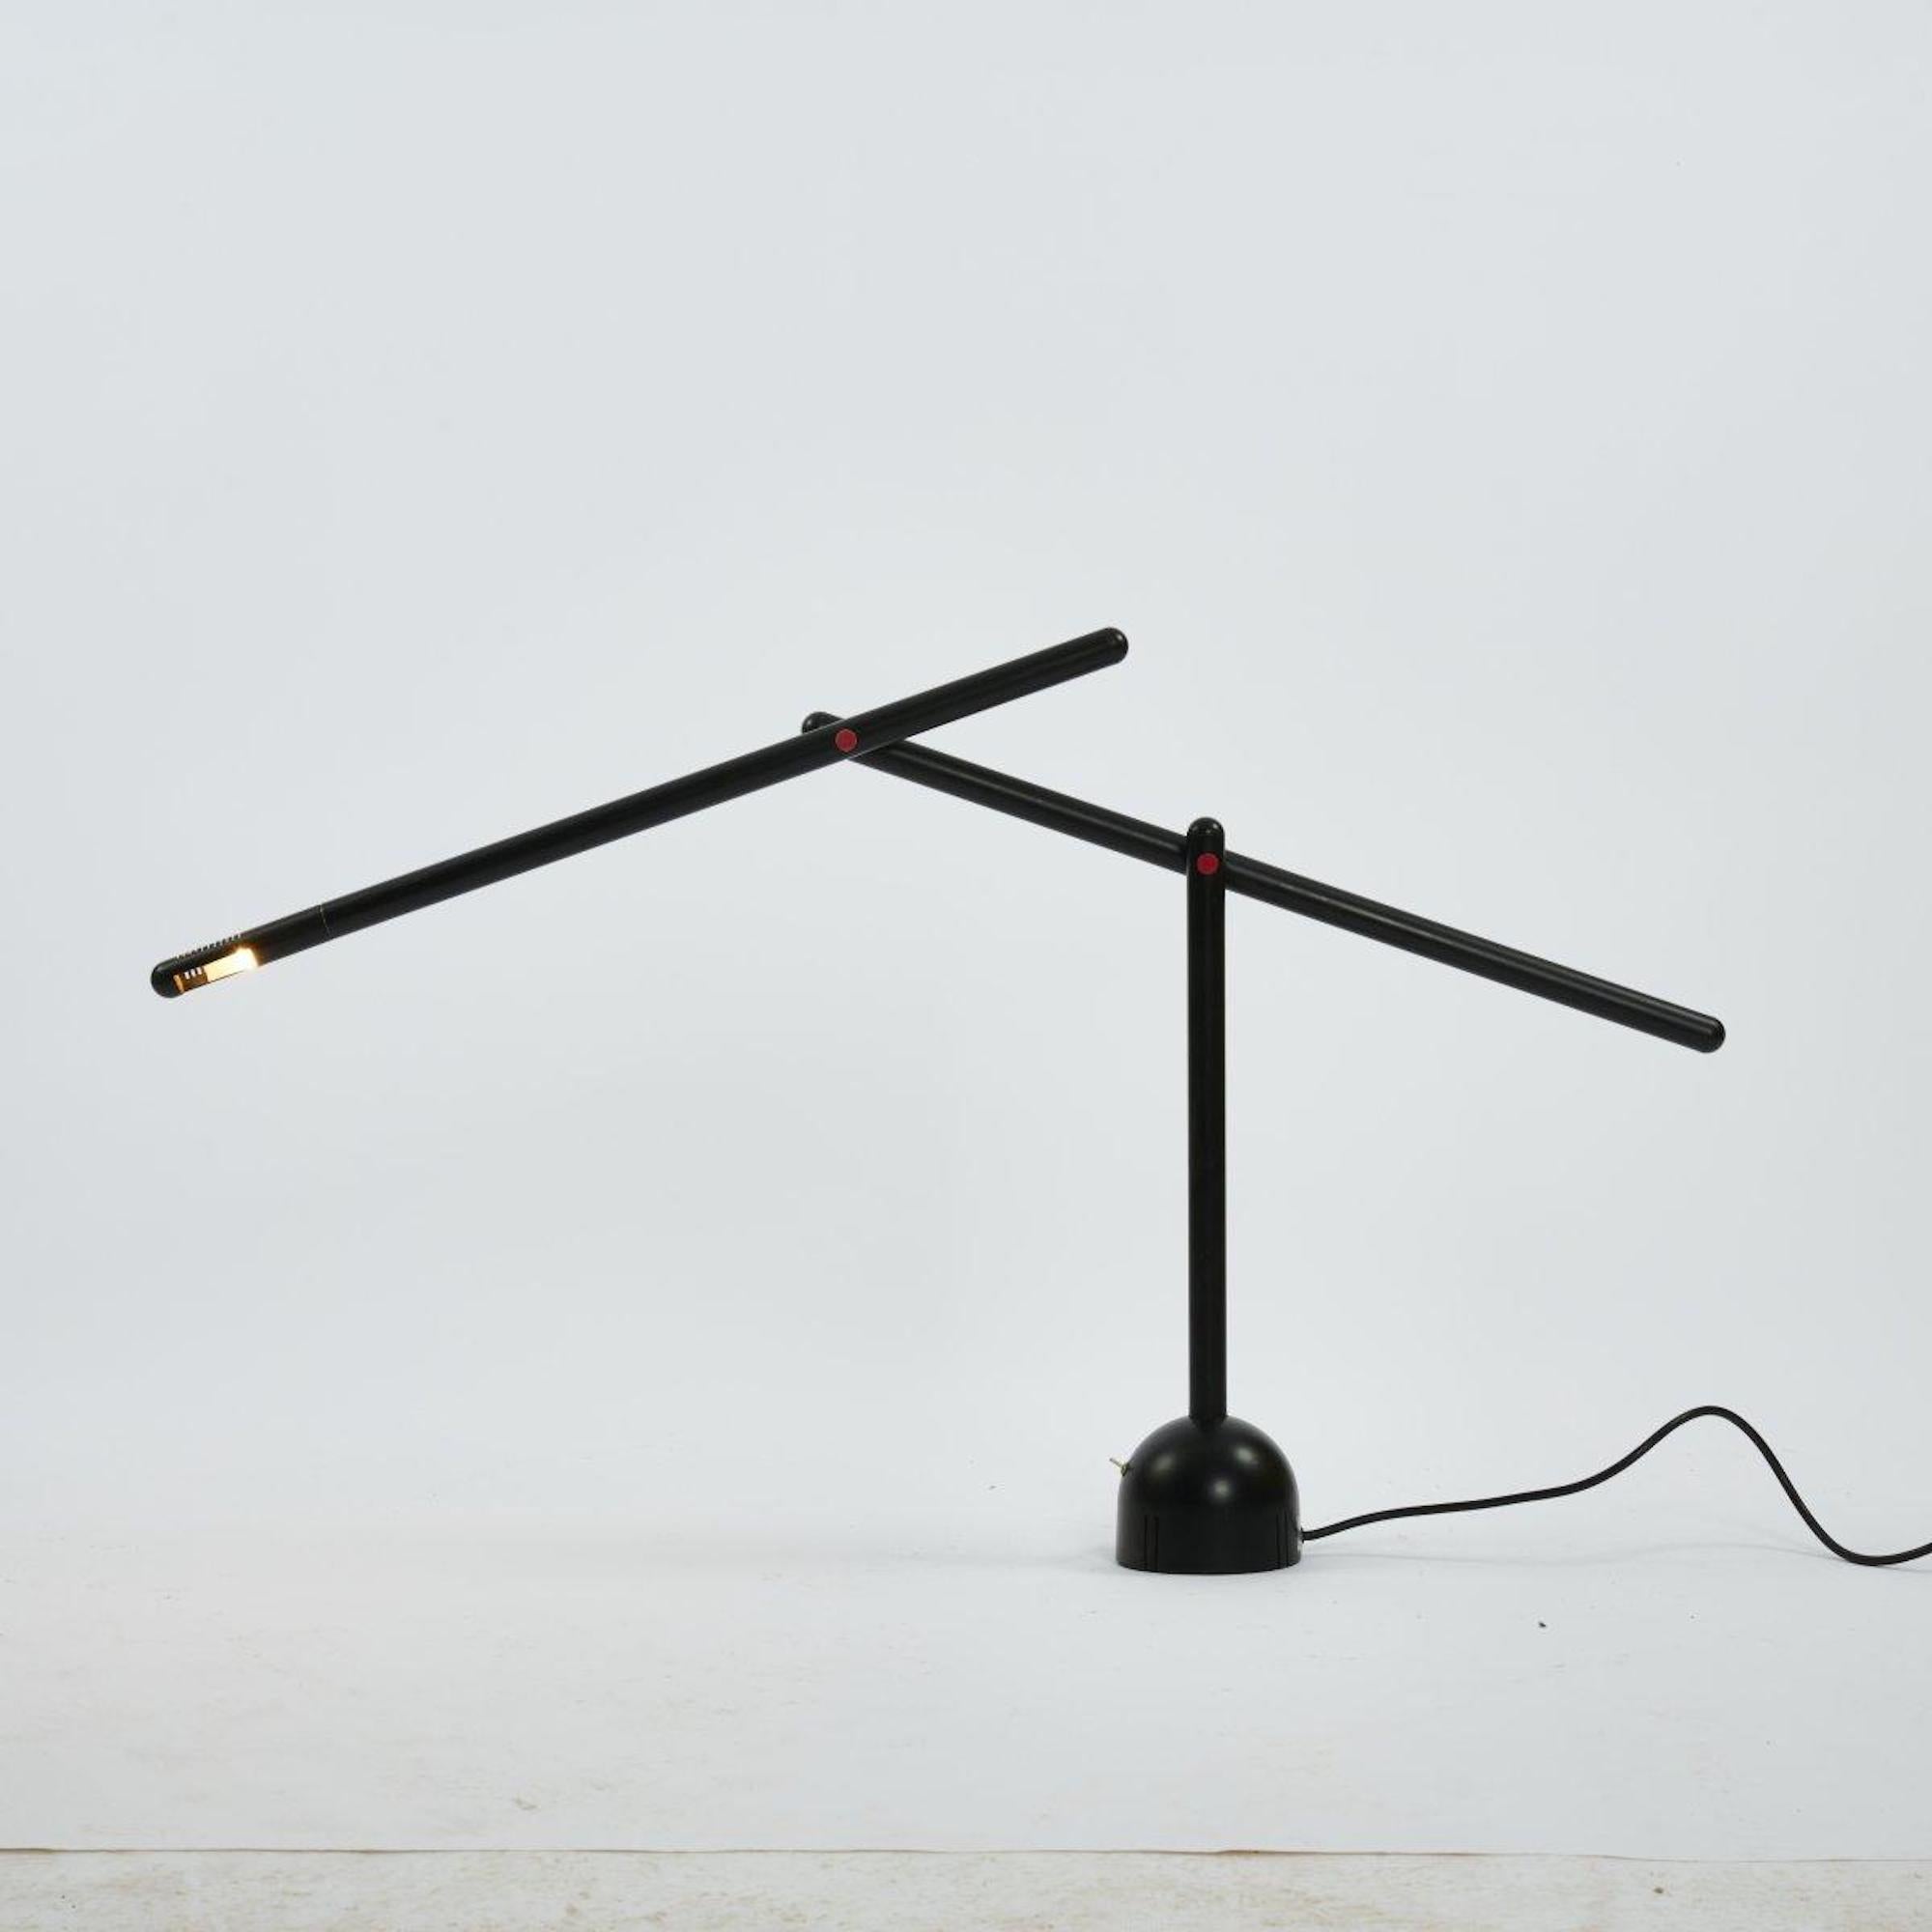 Mira table lights are a work realized by Mario Arnaboldi in 1983.

H. 119 cm (max.). Made by Programmaluce, Milan.

Metal tube, enameled black, plastic, red, aluminum head

Marked: designer and manufacturer's label.

Ref. Fiell, 1000 Lights, Vol. 2,